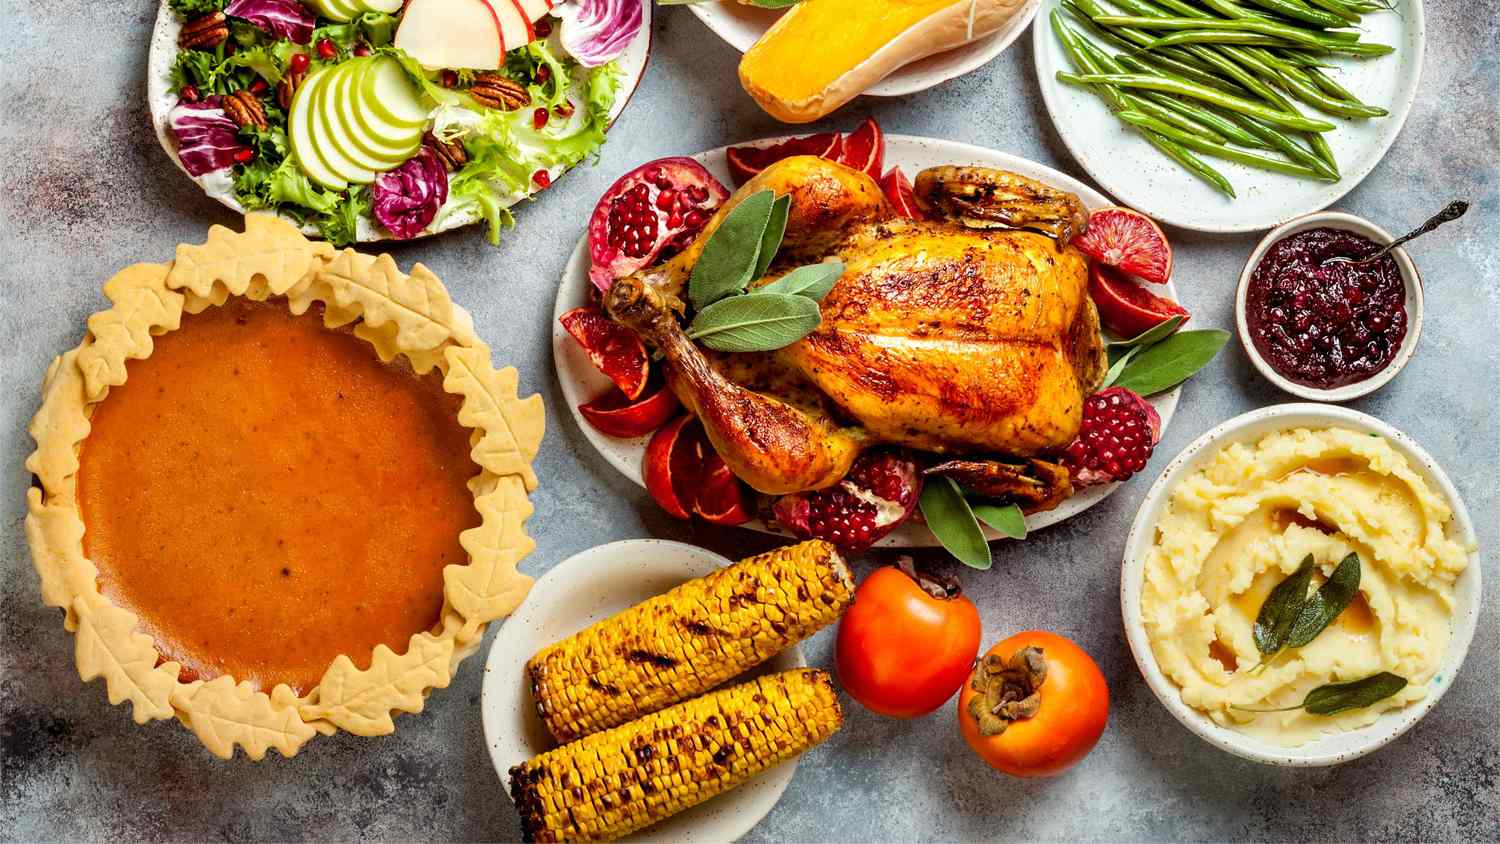 Tips for Hosting a Scaled-Down Thanksgiving